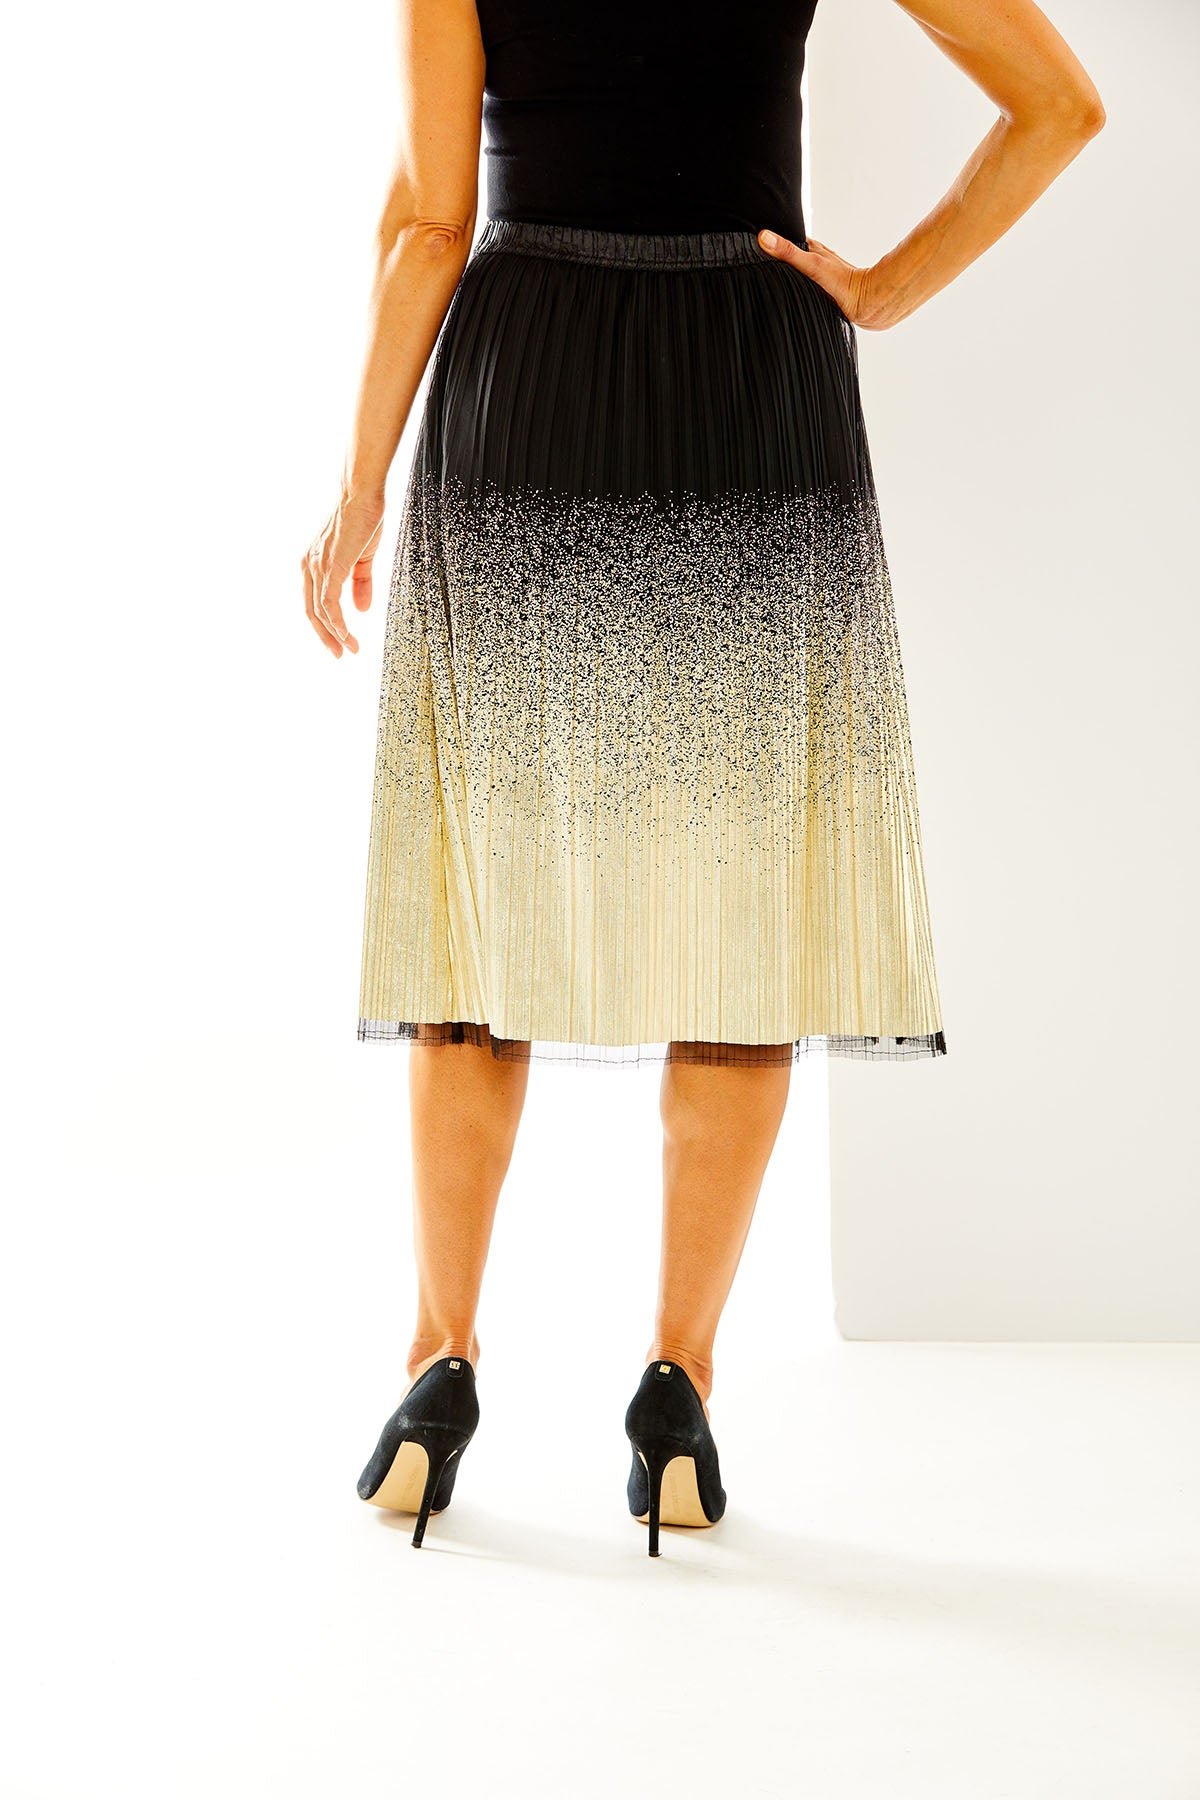 Woman in black and gold midi skirt